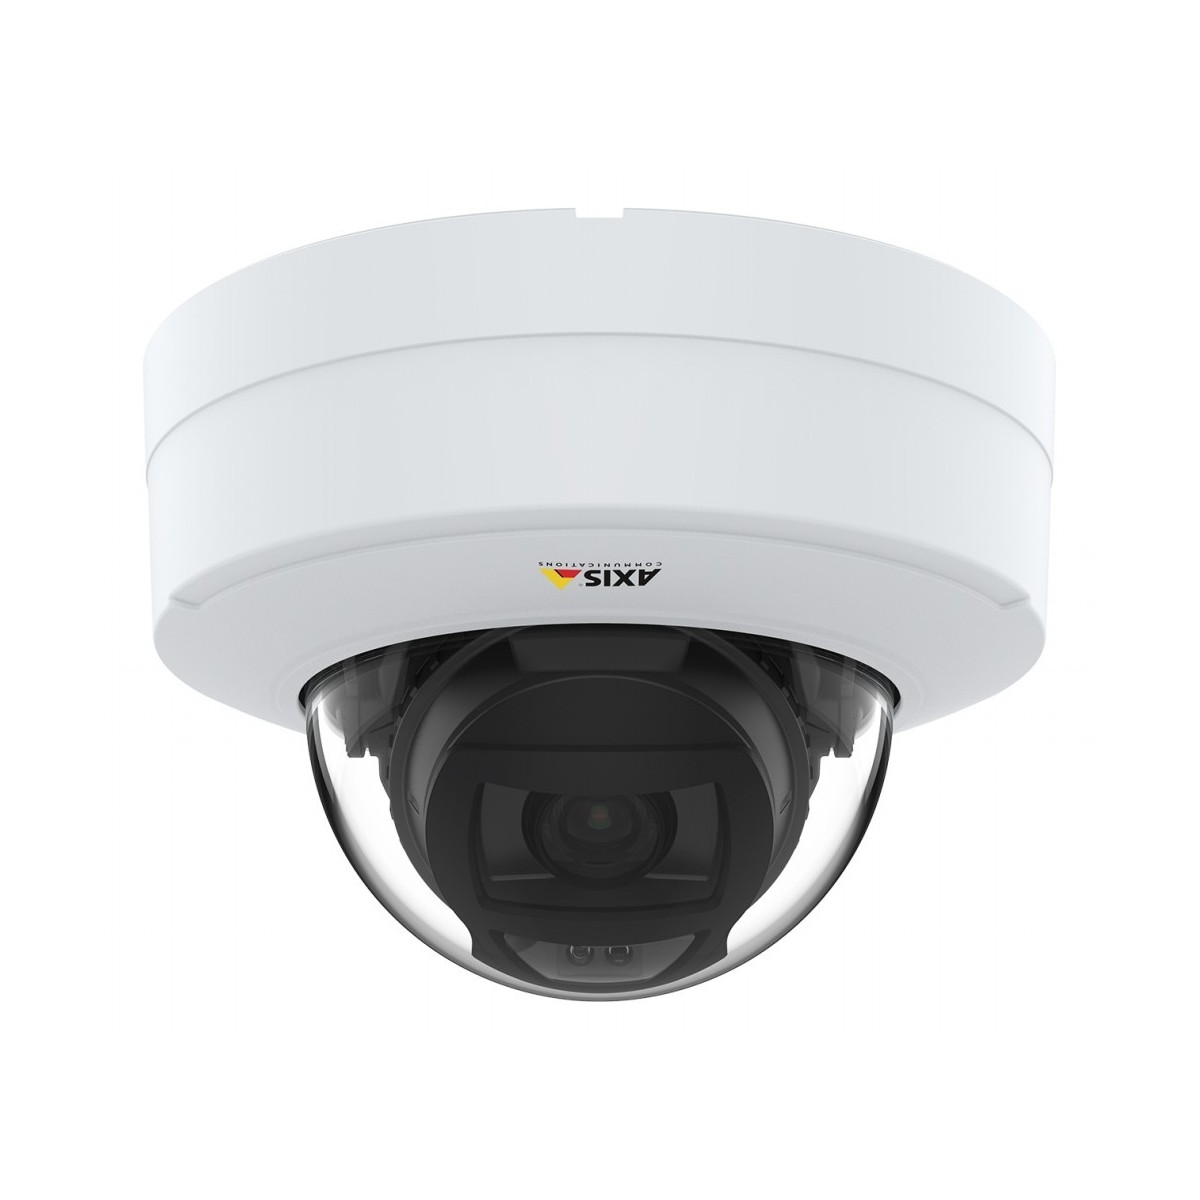 Axis P3245-LV - IP security camera - Outdoor - Wired - Simplified Chinese - Traditional Chinese - German - English - Spanish - F